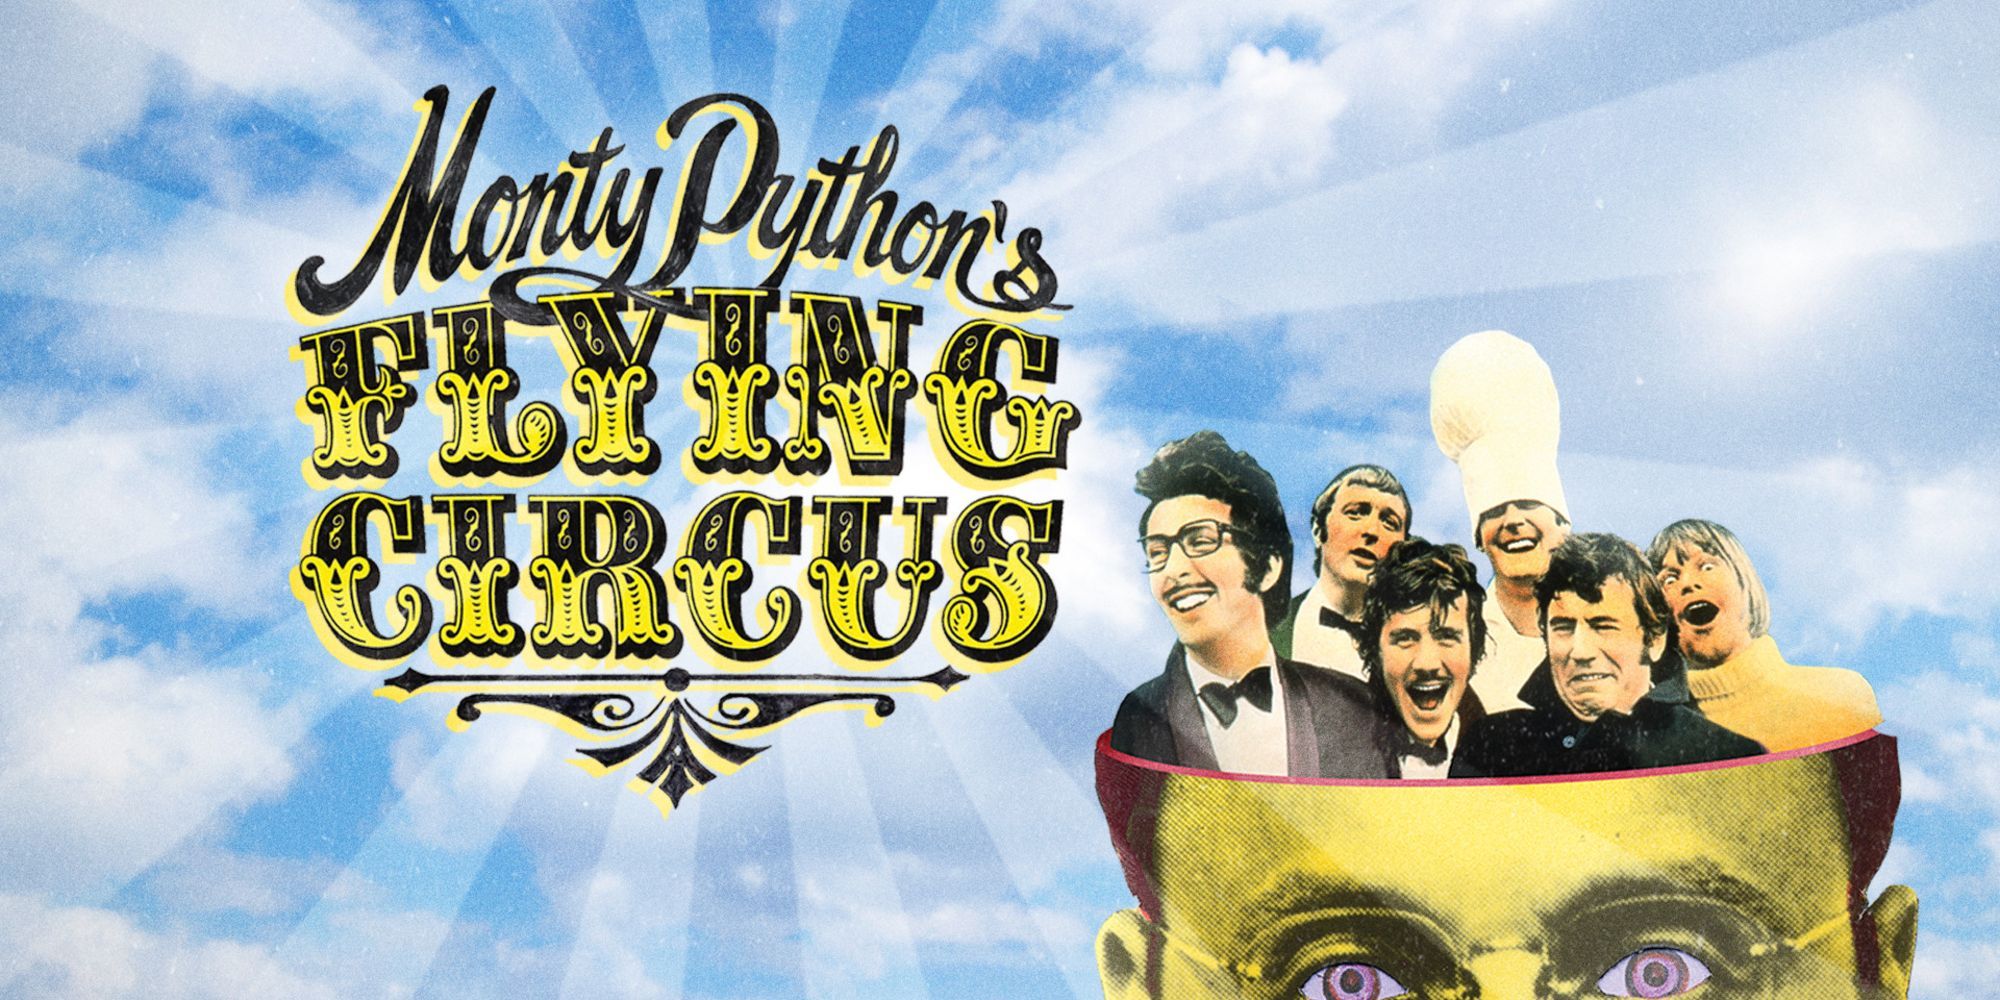 Monty Python's Flying Circus opening title screen